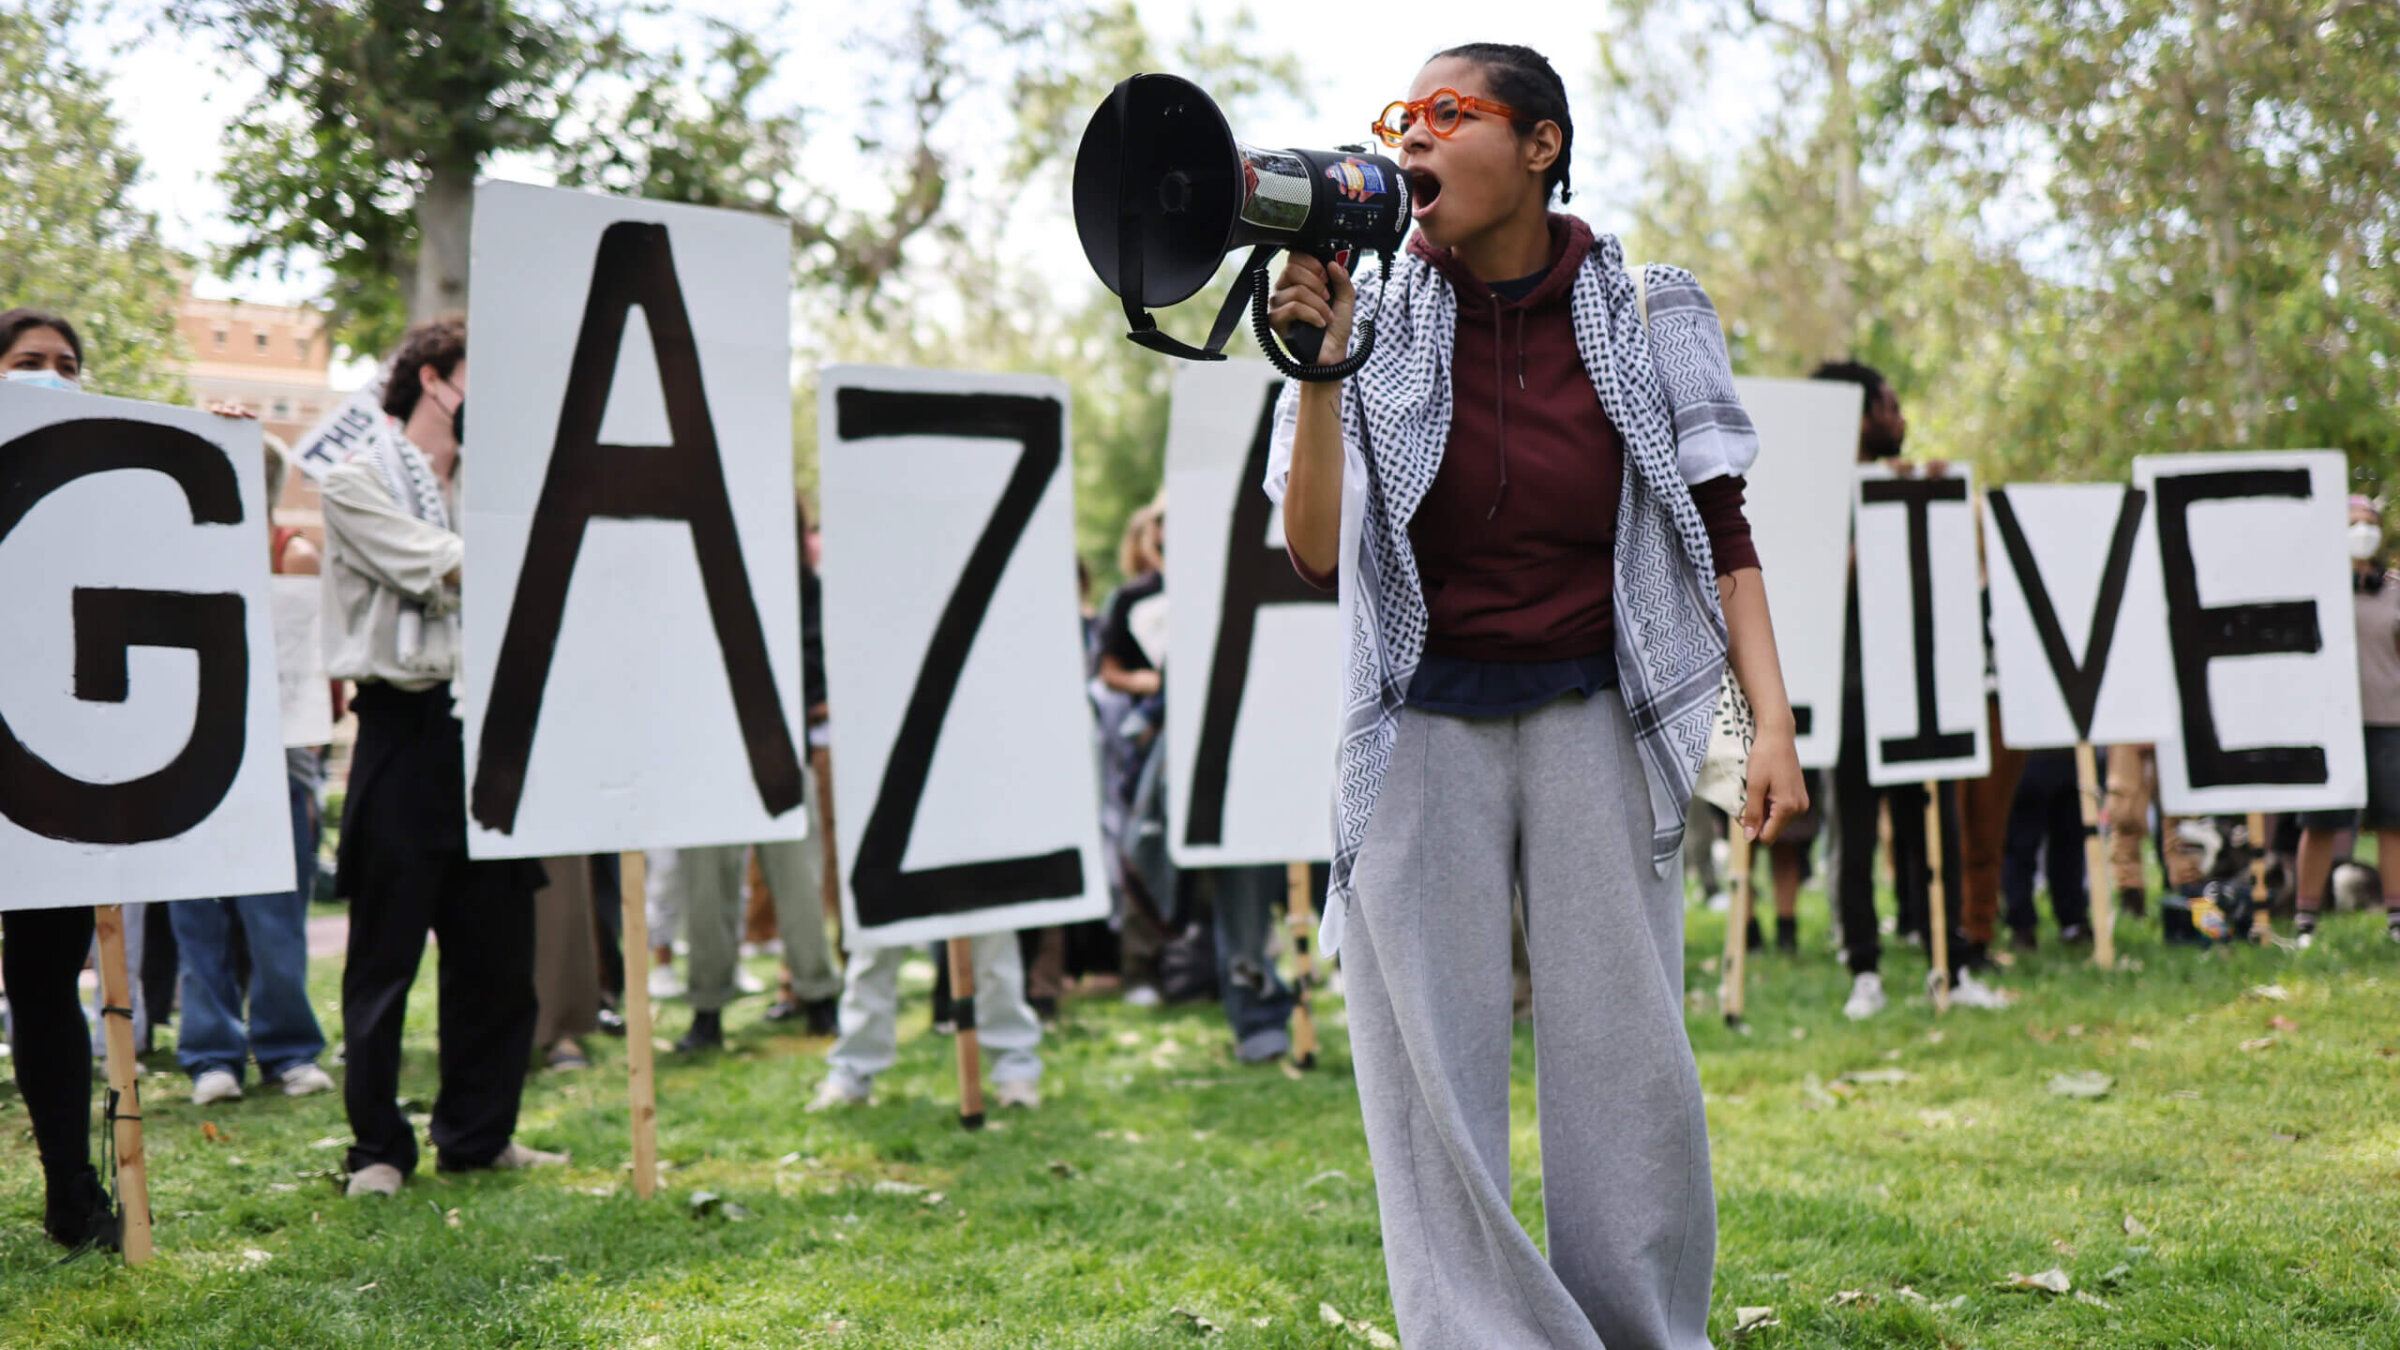 Pro-Palestinian demonstrators rally at an encampment in support of Gaza at the University of Southern California on April 24 in Los Angeles, California. 